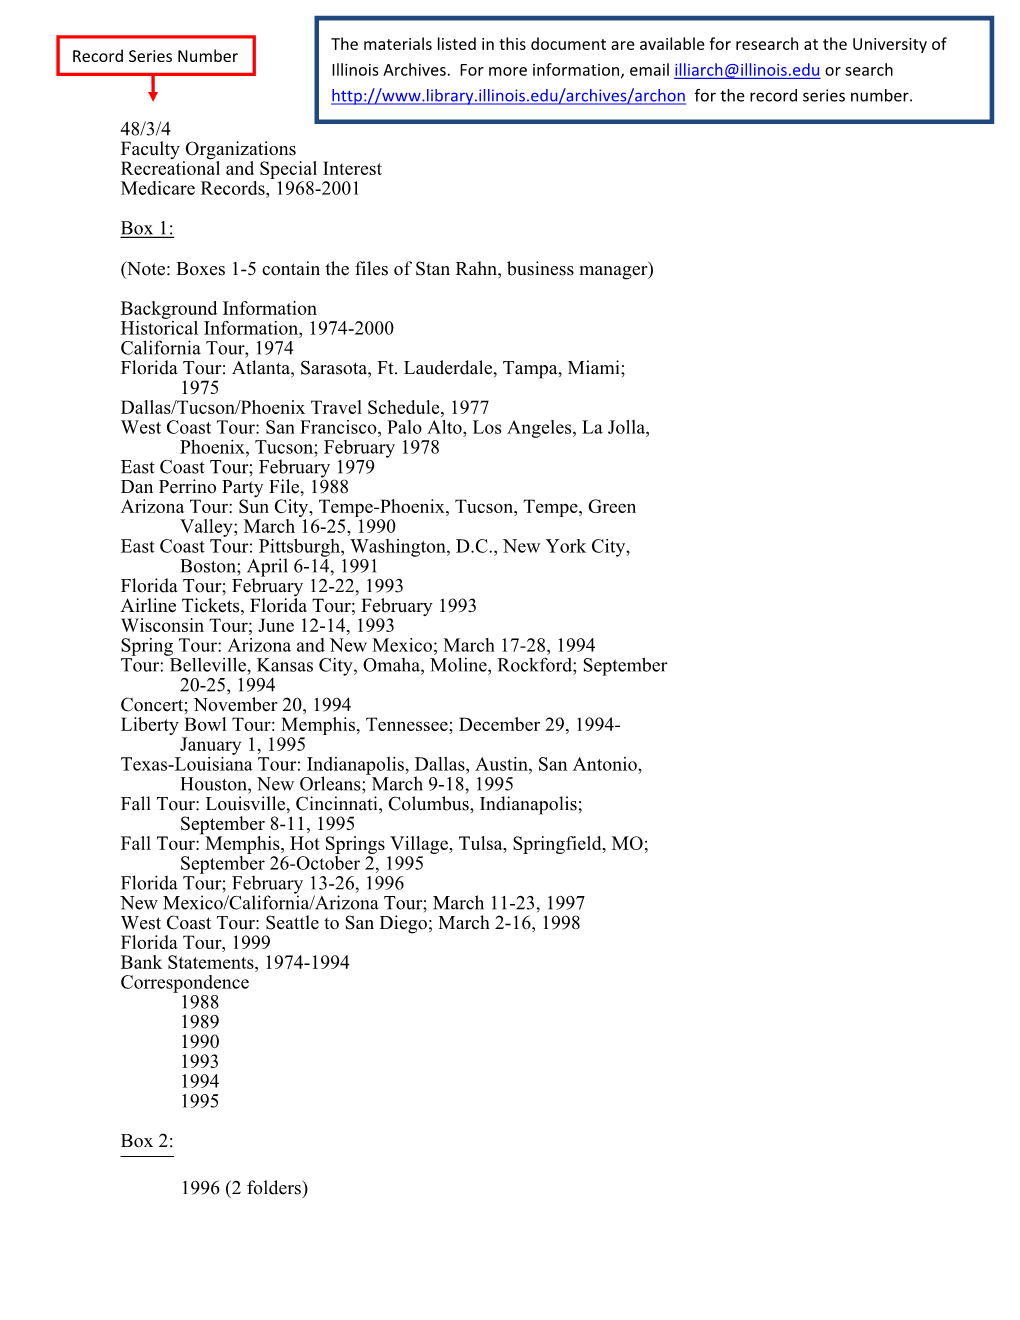 48/3/4 Faculty Organizations Recreational and Special Interest Medicare Records, 1968-2001